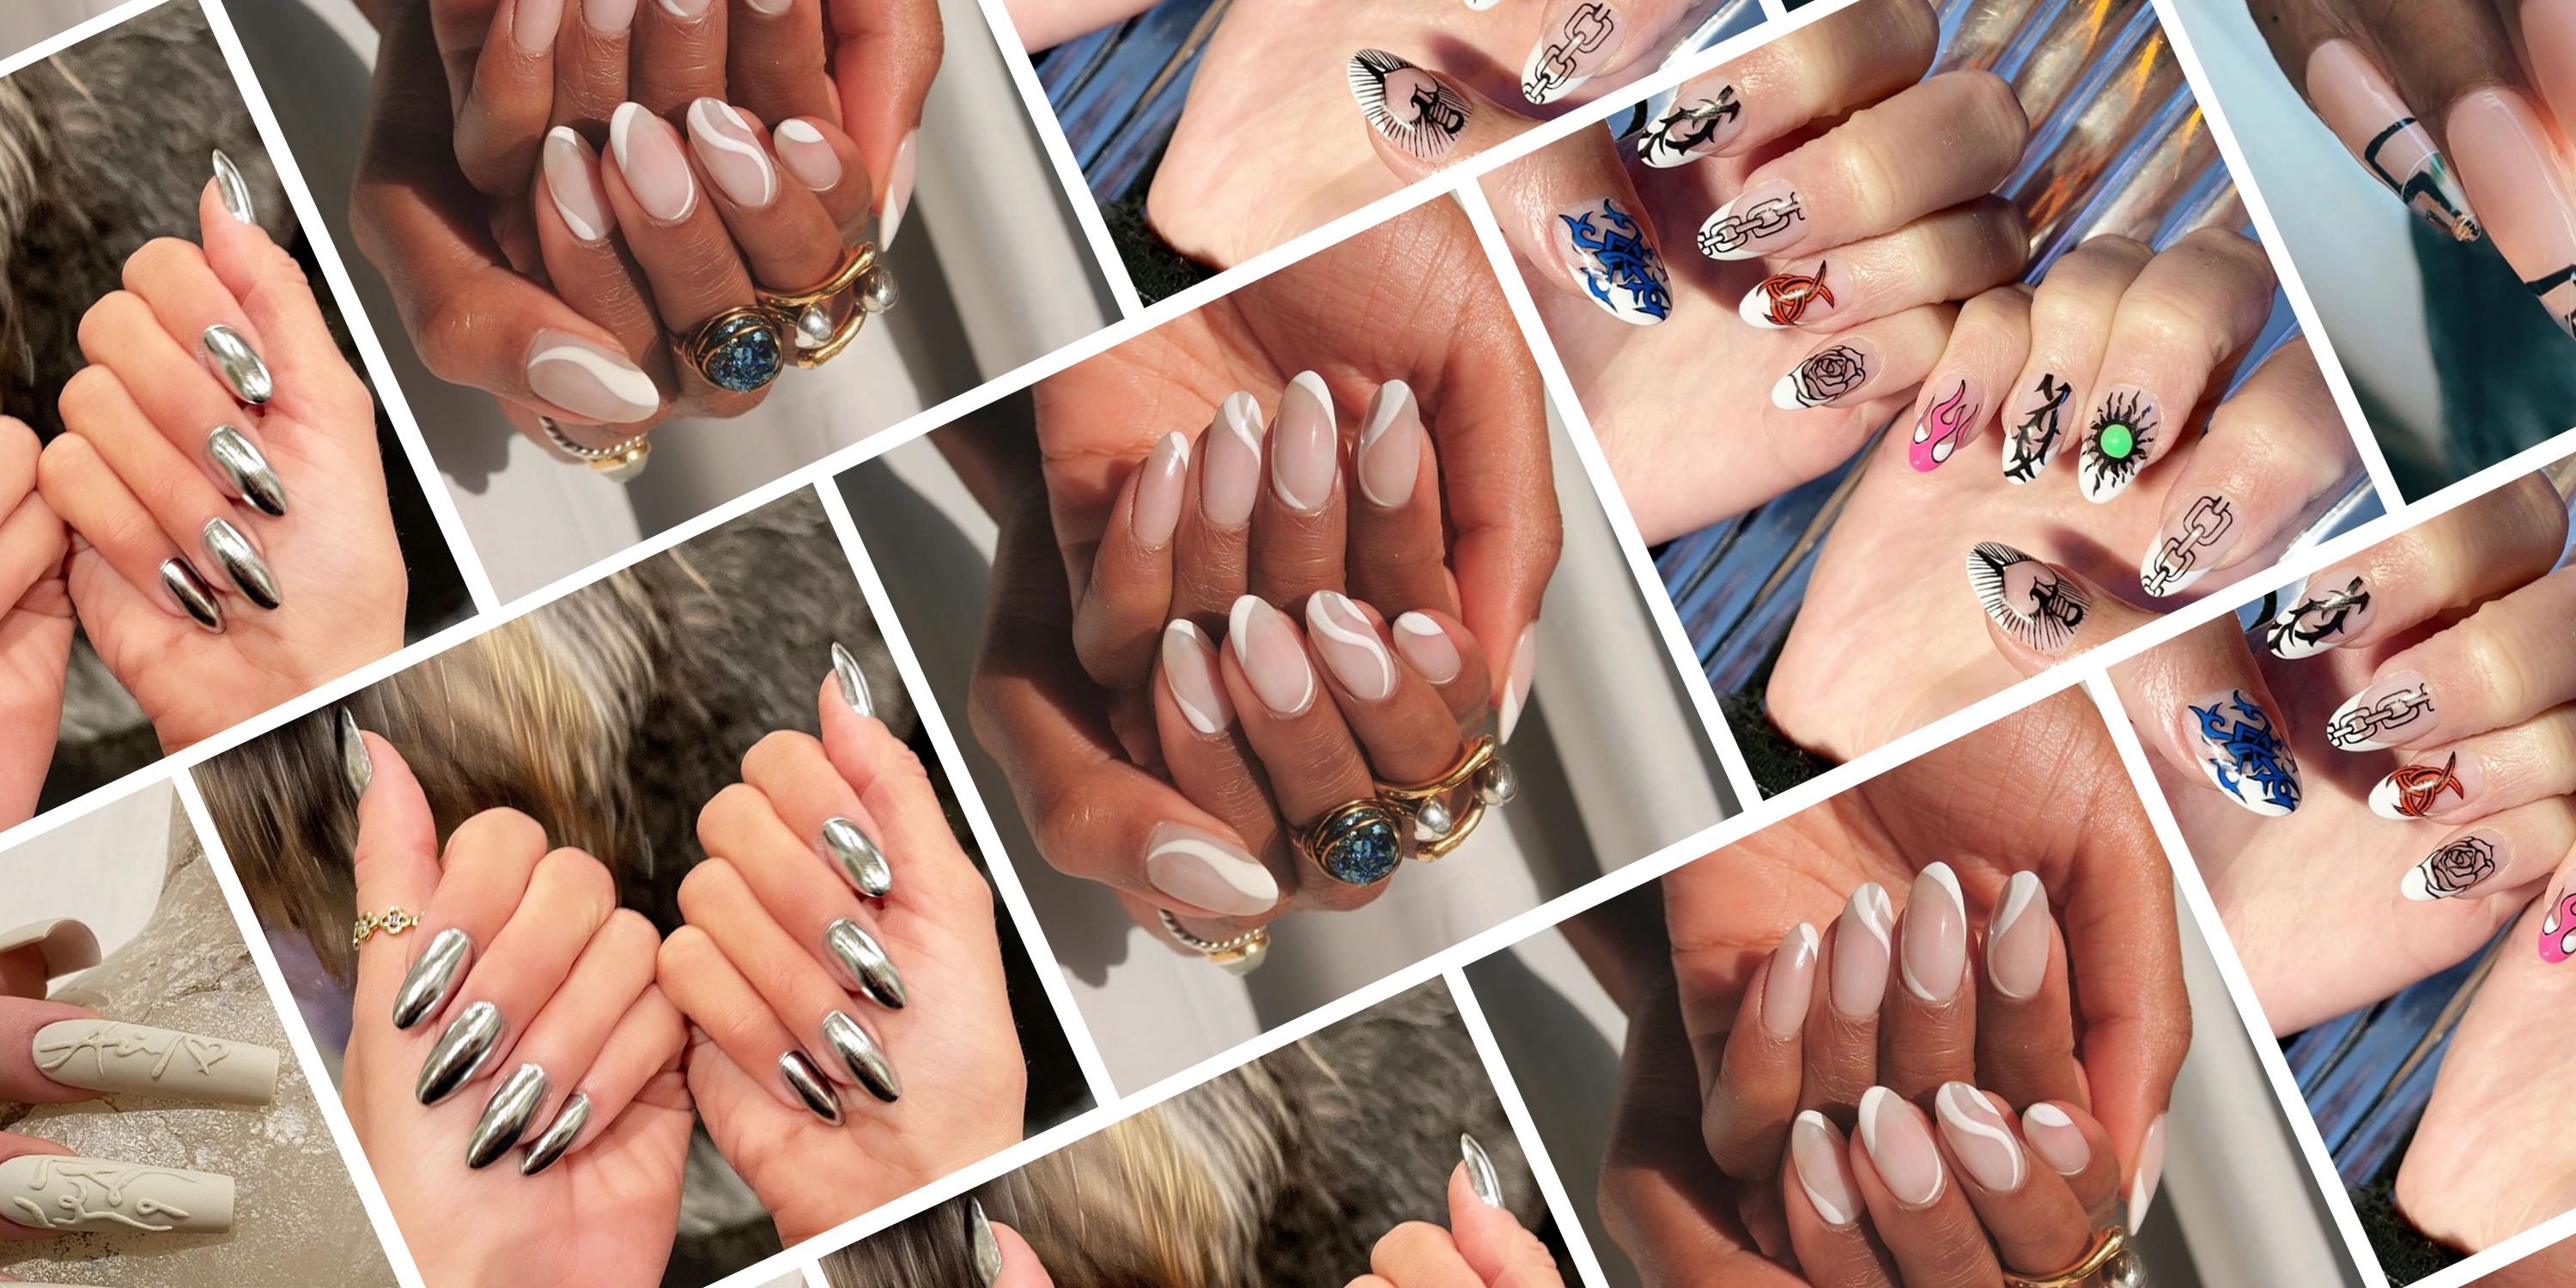 9. "The Top Nail Art Trends for Men in 2021" - wide 4